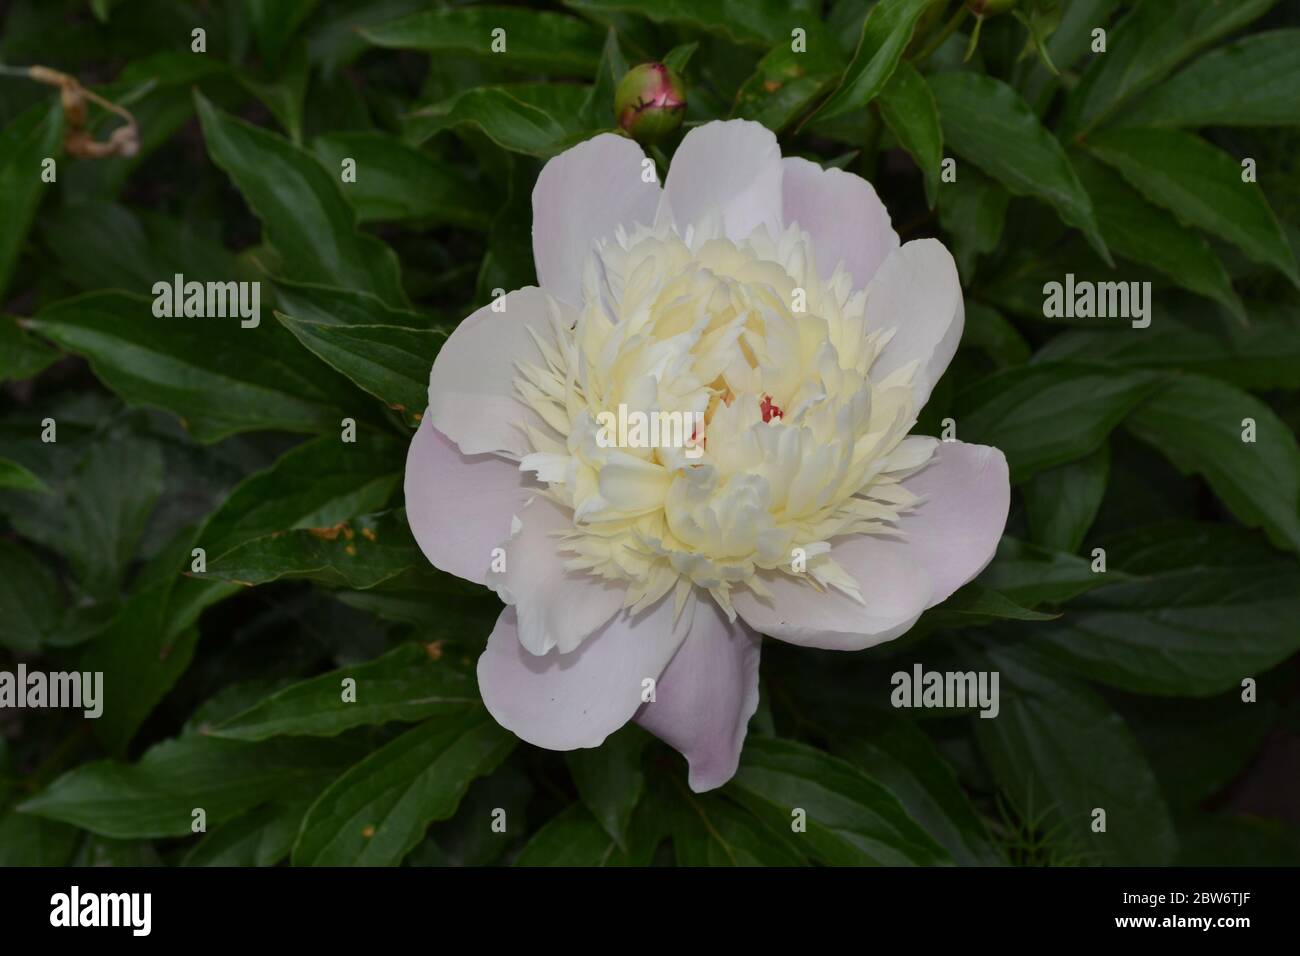 Home garden, flower bed. Gardening. House, field. Green leaves, bushes. Flower Peony. Paeonia, herbaceous perennials and deciduous shrubs. White flowe Stock Photo